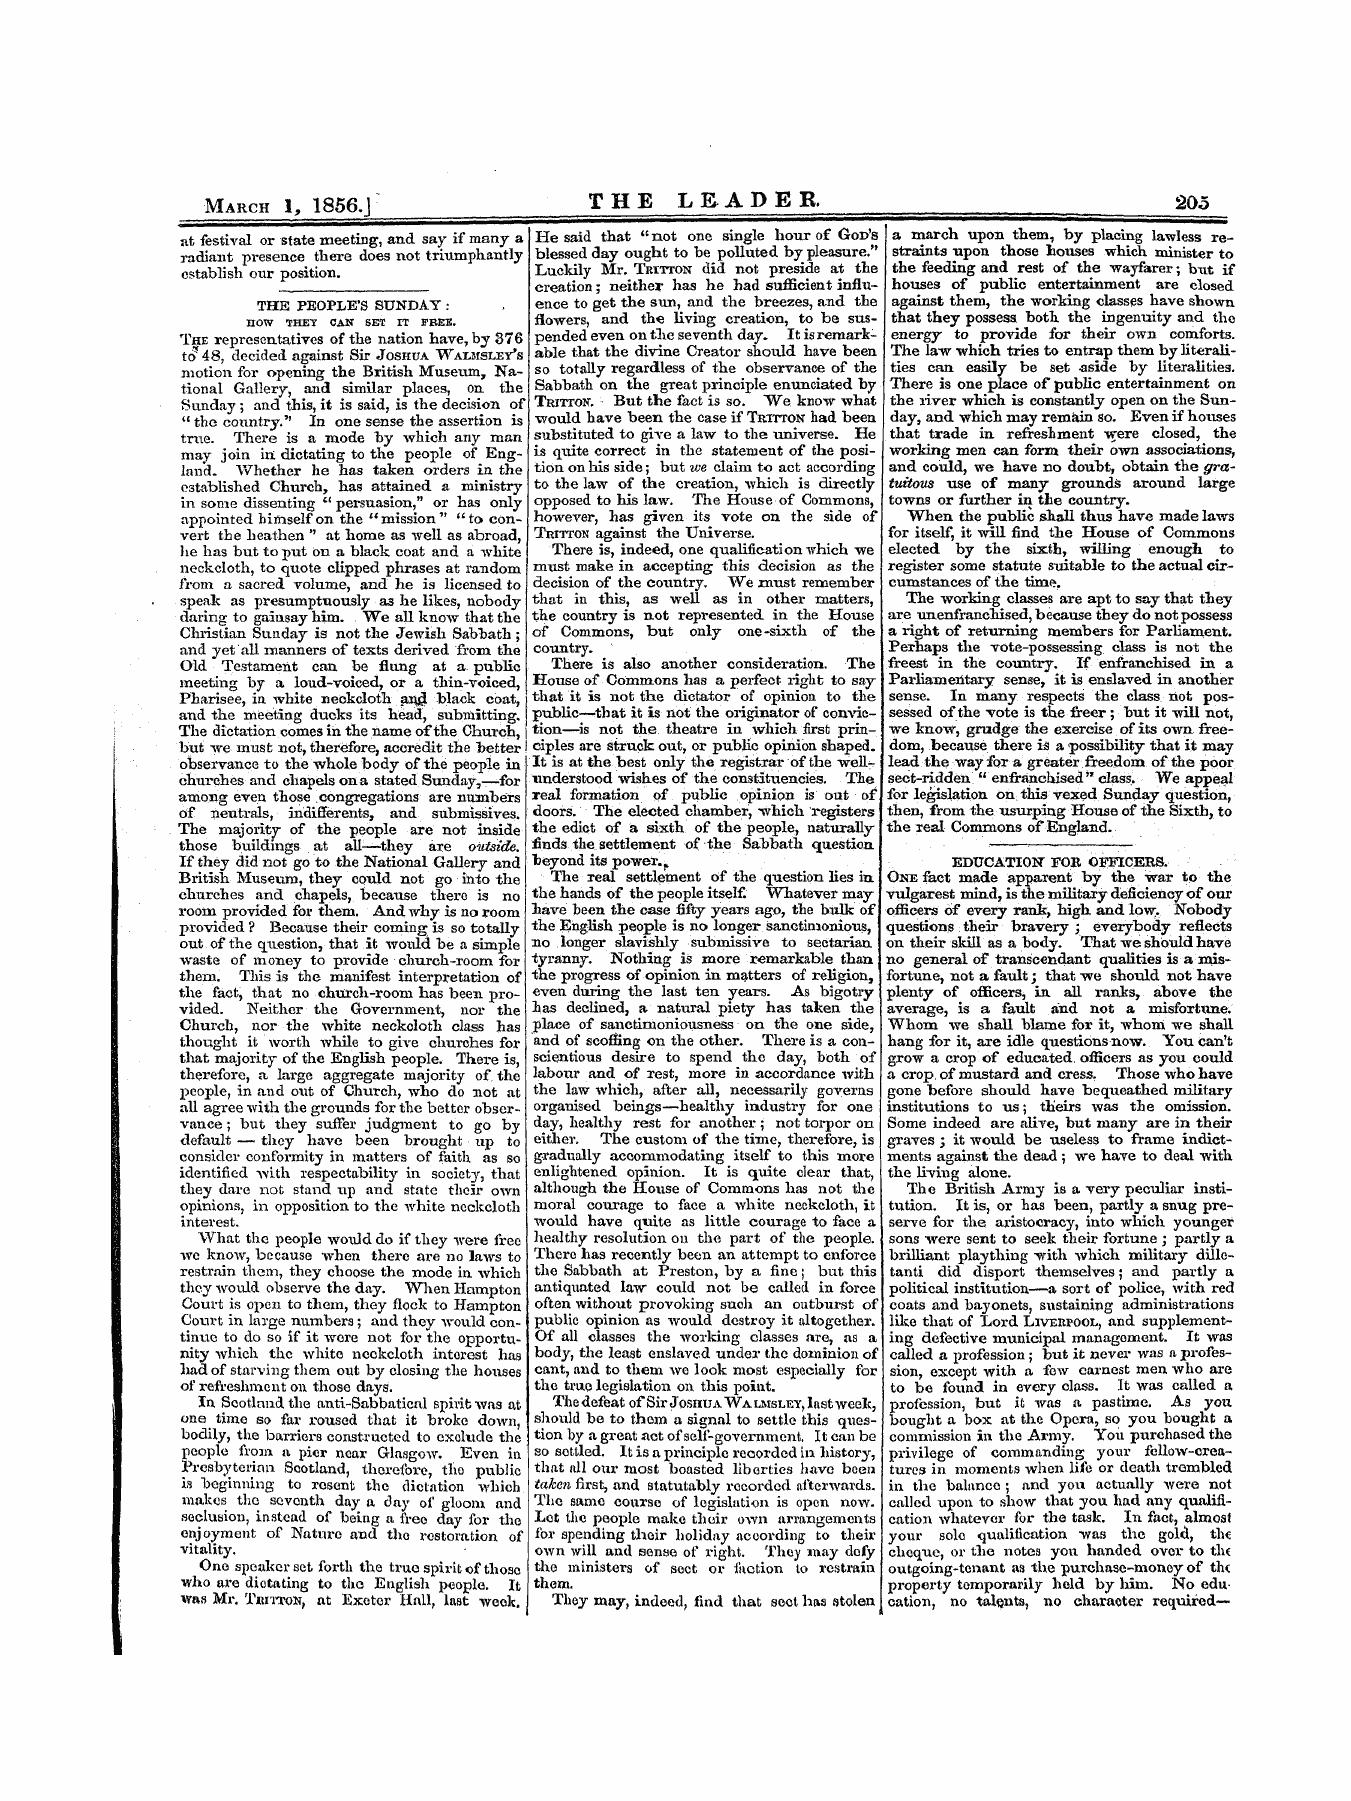 Leader (1850-1860): jS F Y, 1st edition: 13